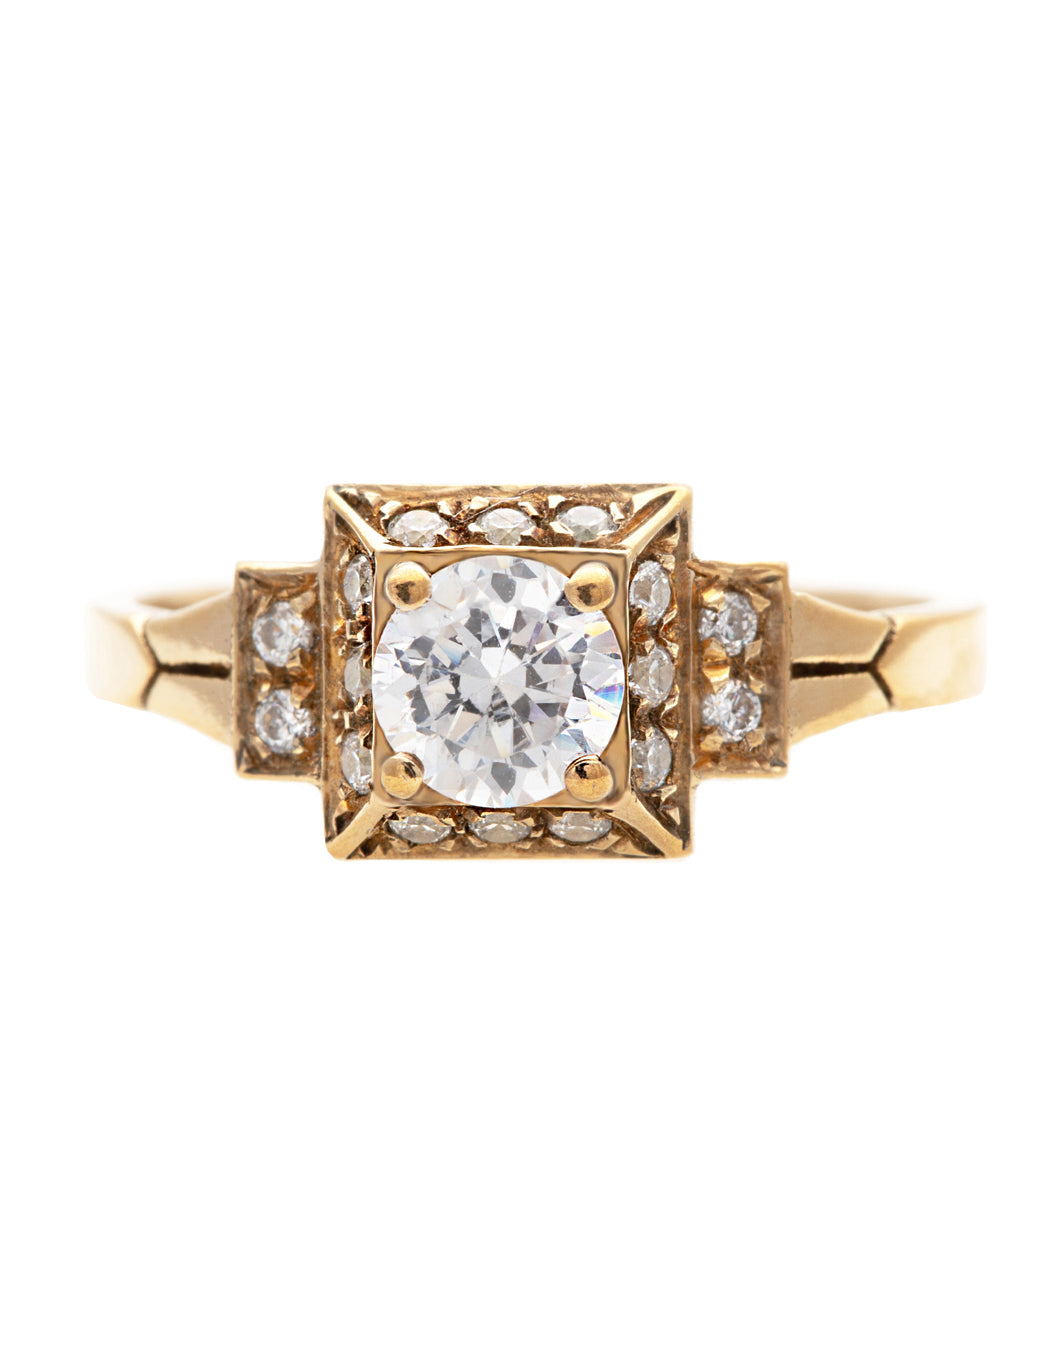 Sublime Diamond Ring with a Round Cut Diamond and Halo – TOR